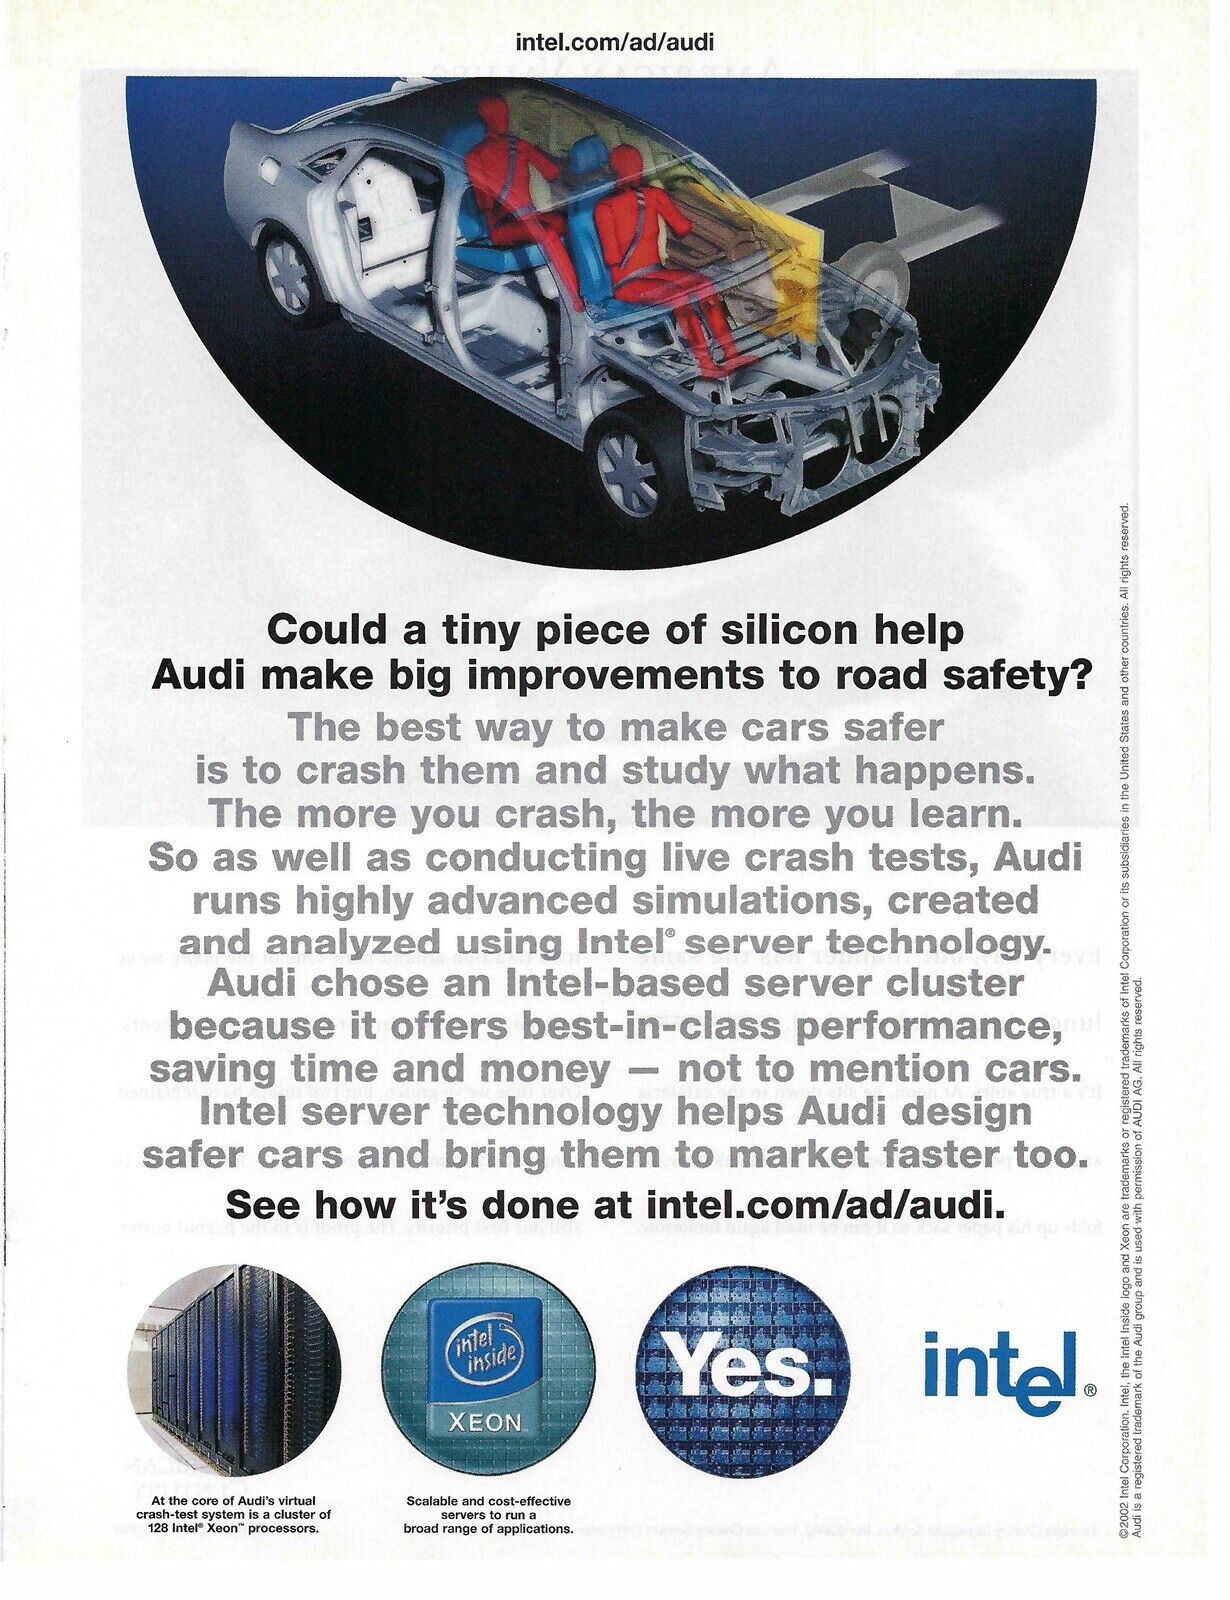 2002 Intel Xeon Processors & Audi’s Road Safety Vintage Magazine Print Ad/Poster